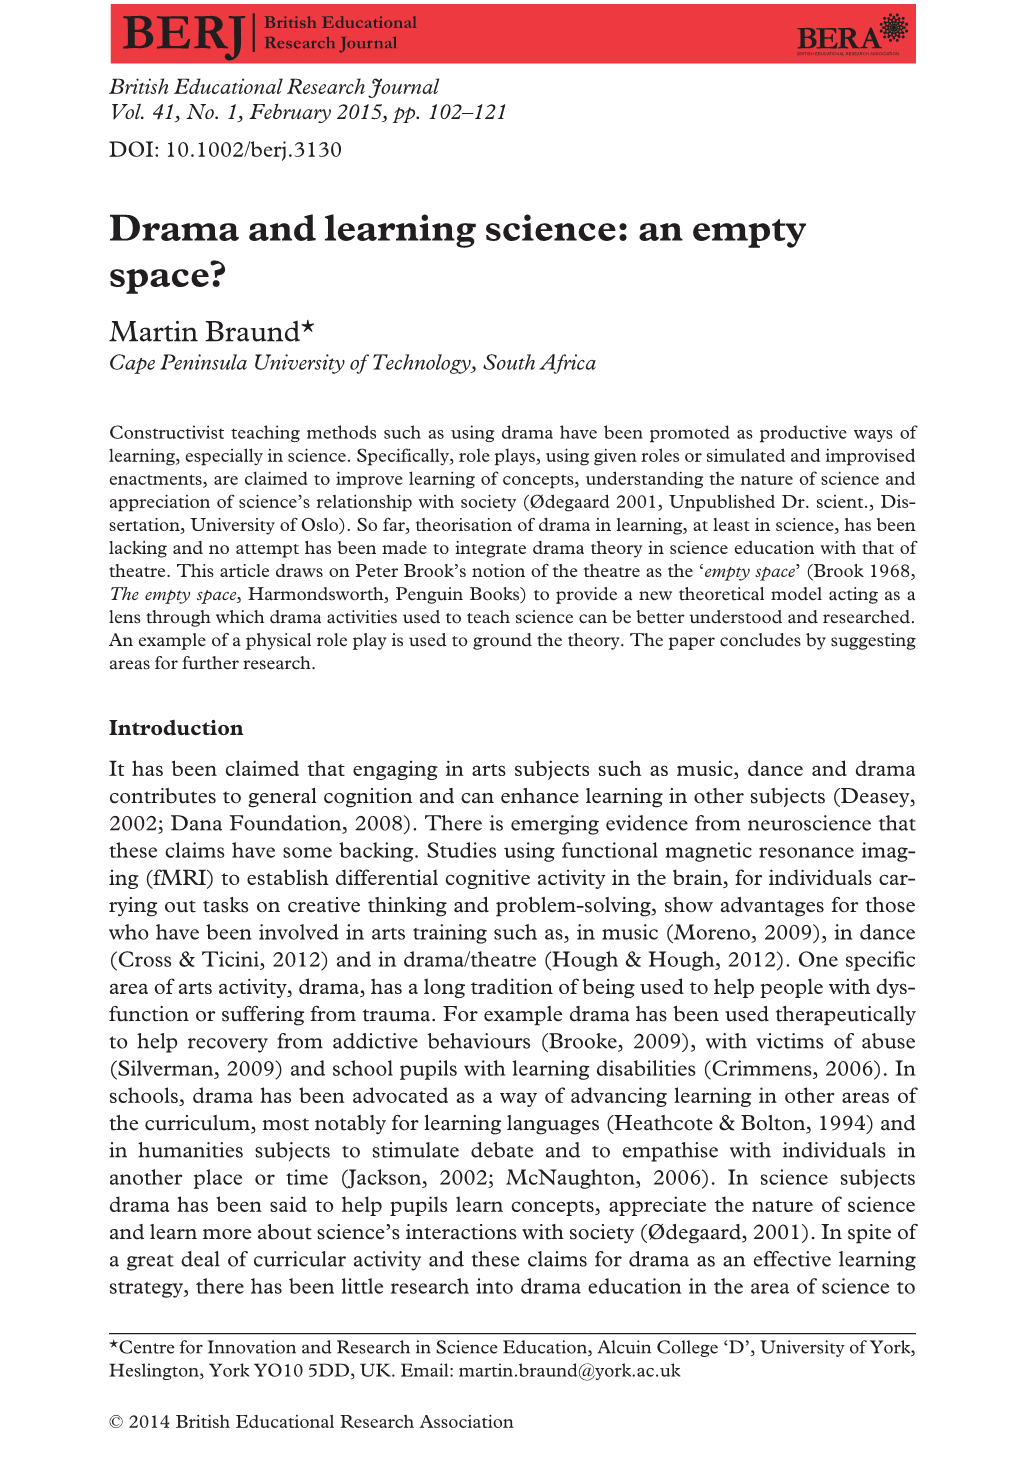 Drama and Learning Science: an Empty Space? Martin Braund* Cape Peninsula University of Technology, South Africa